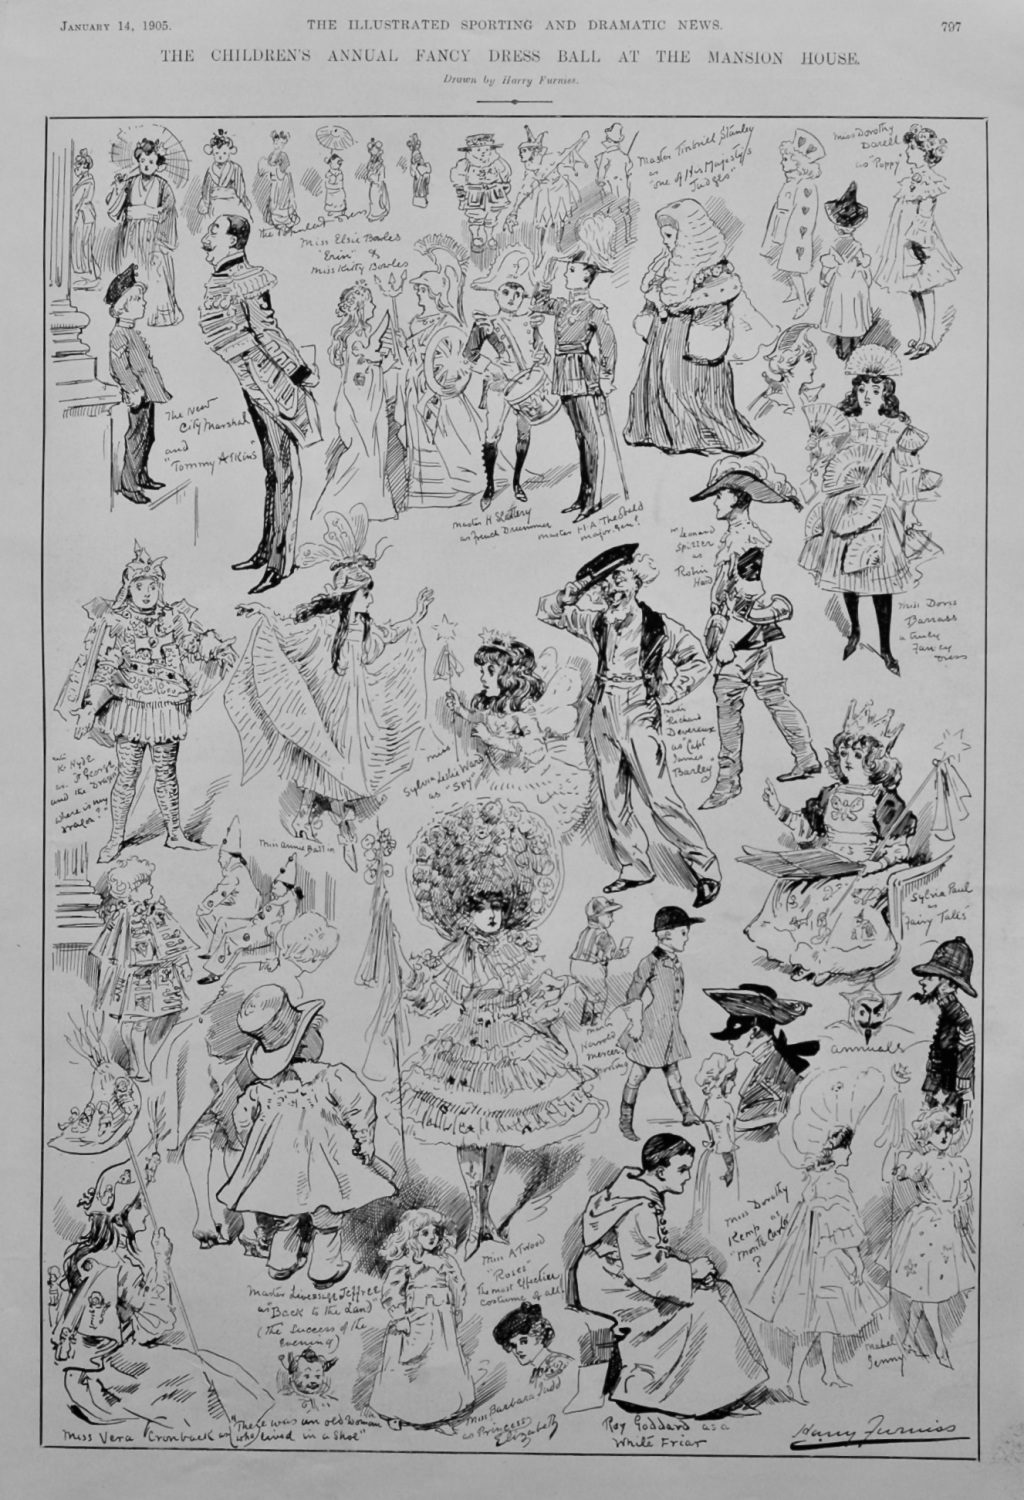 The Christmas Annual Fancy Dress Ball at the Mansion House.  1904.